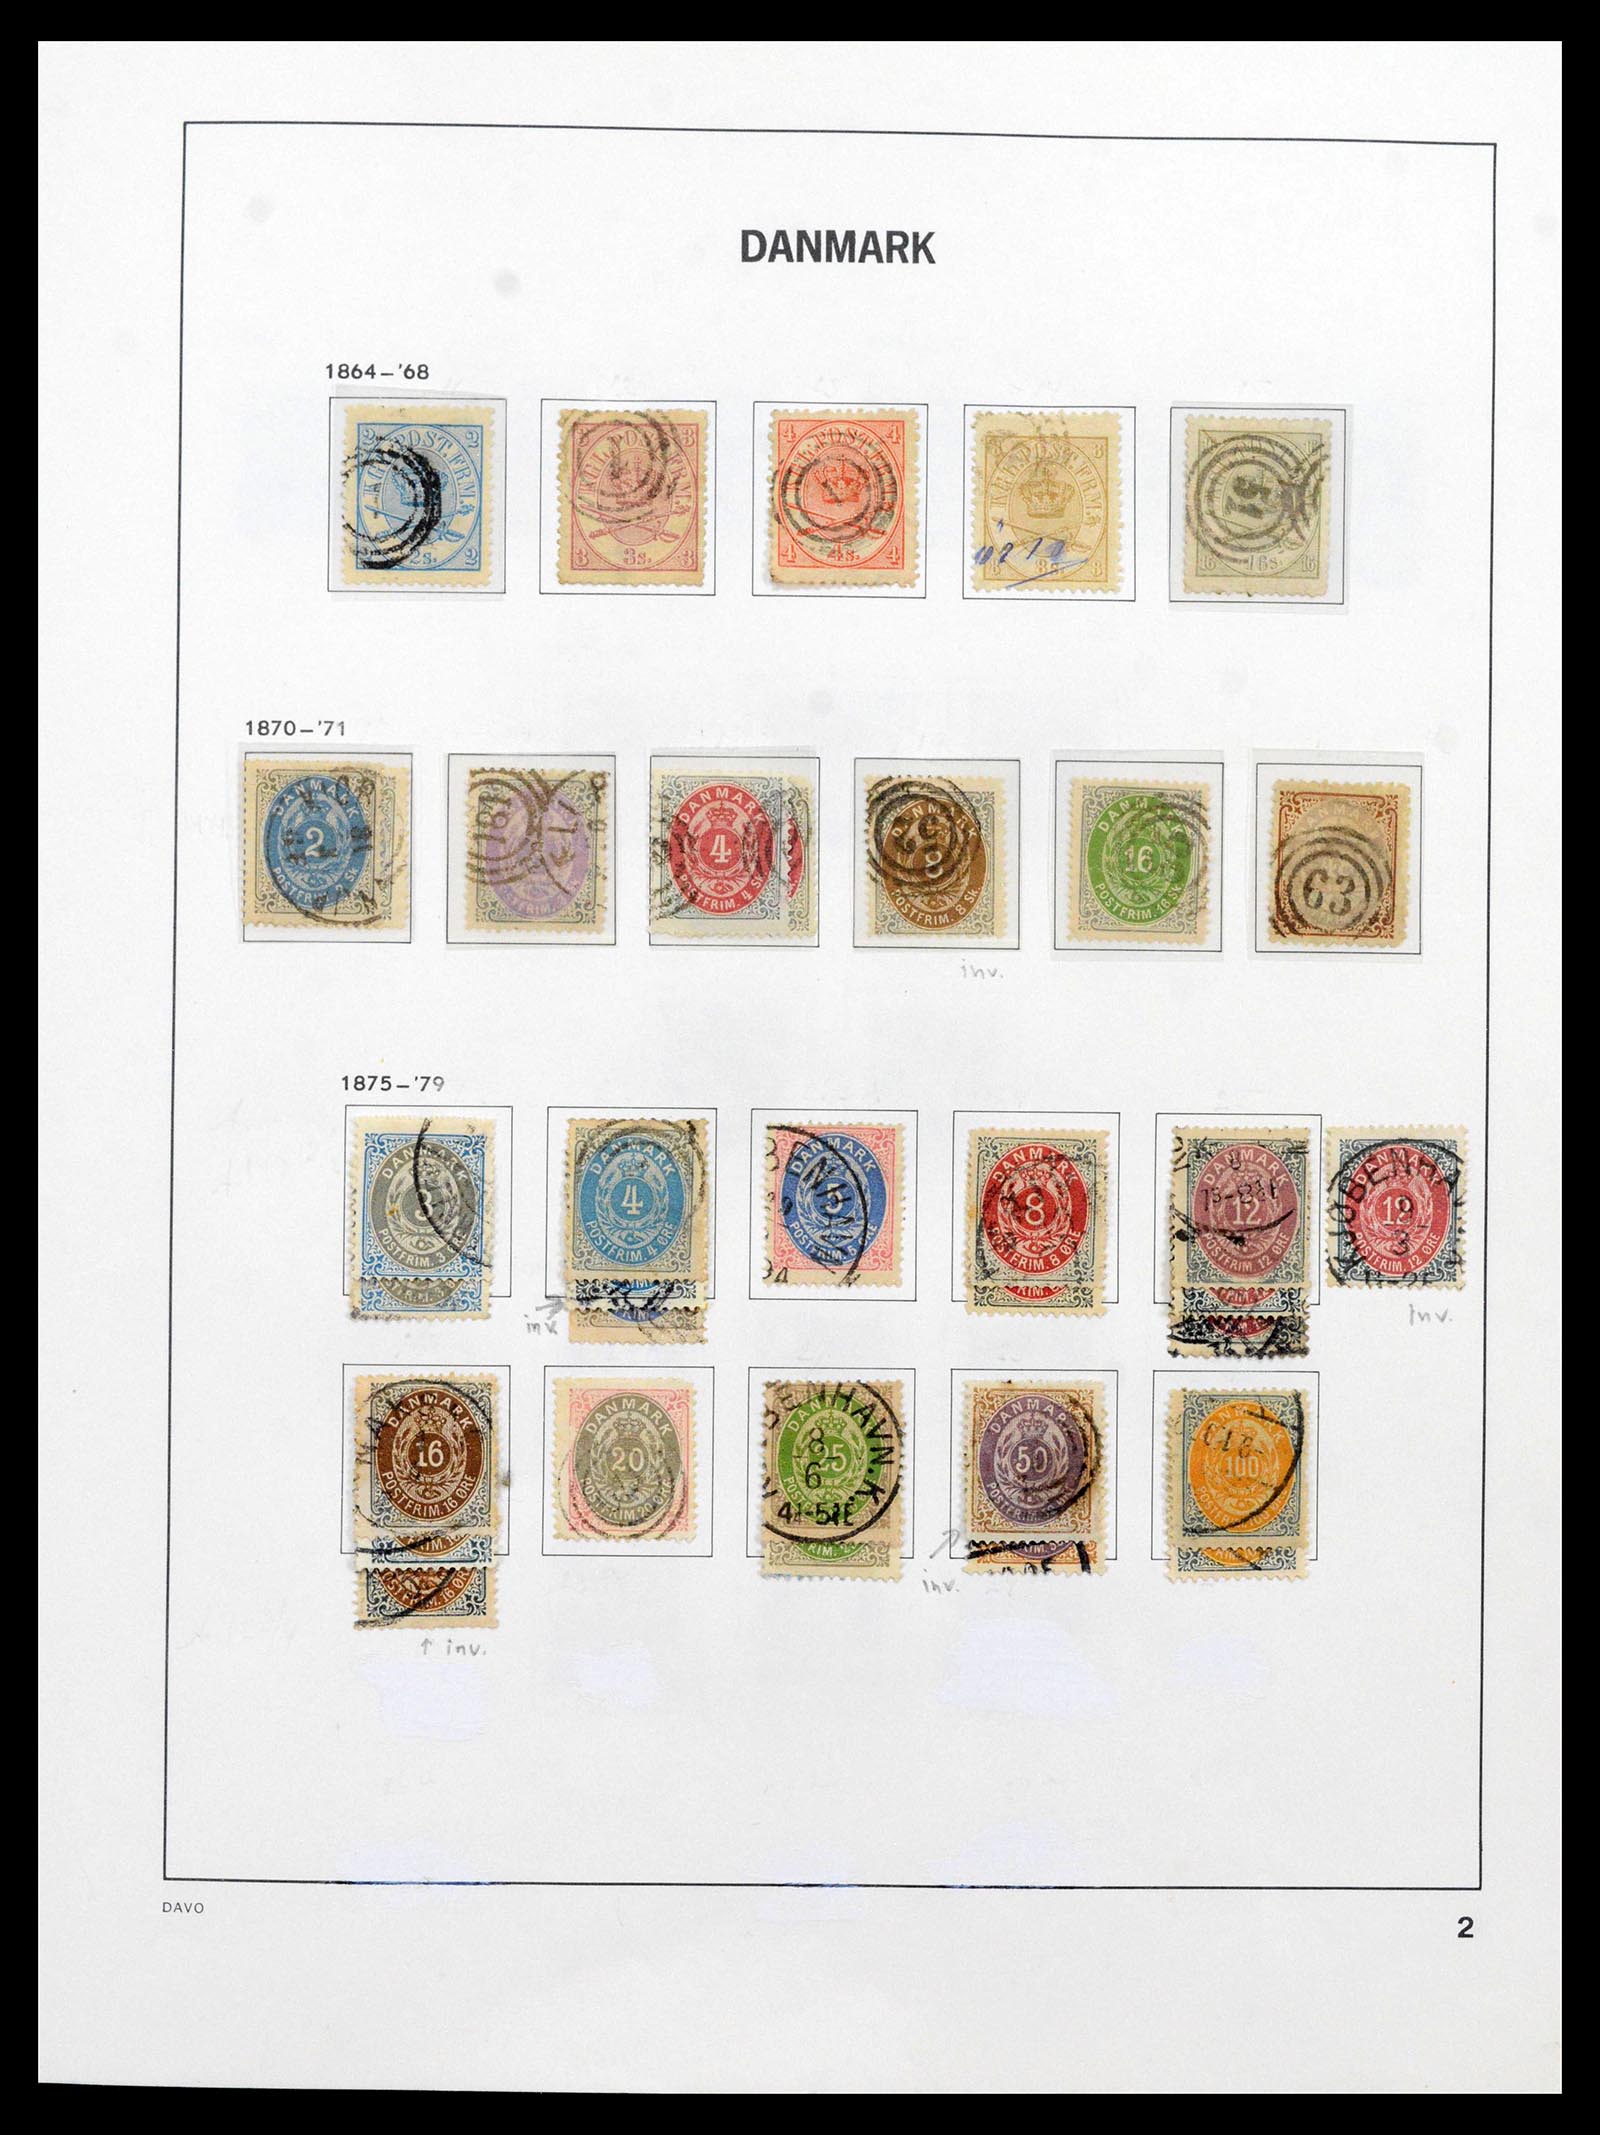 39428 0002 - Stamp collection 39428 Denmark 1851-2019.